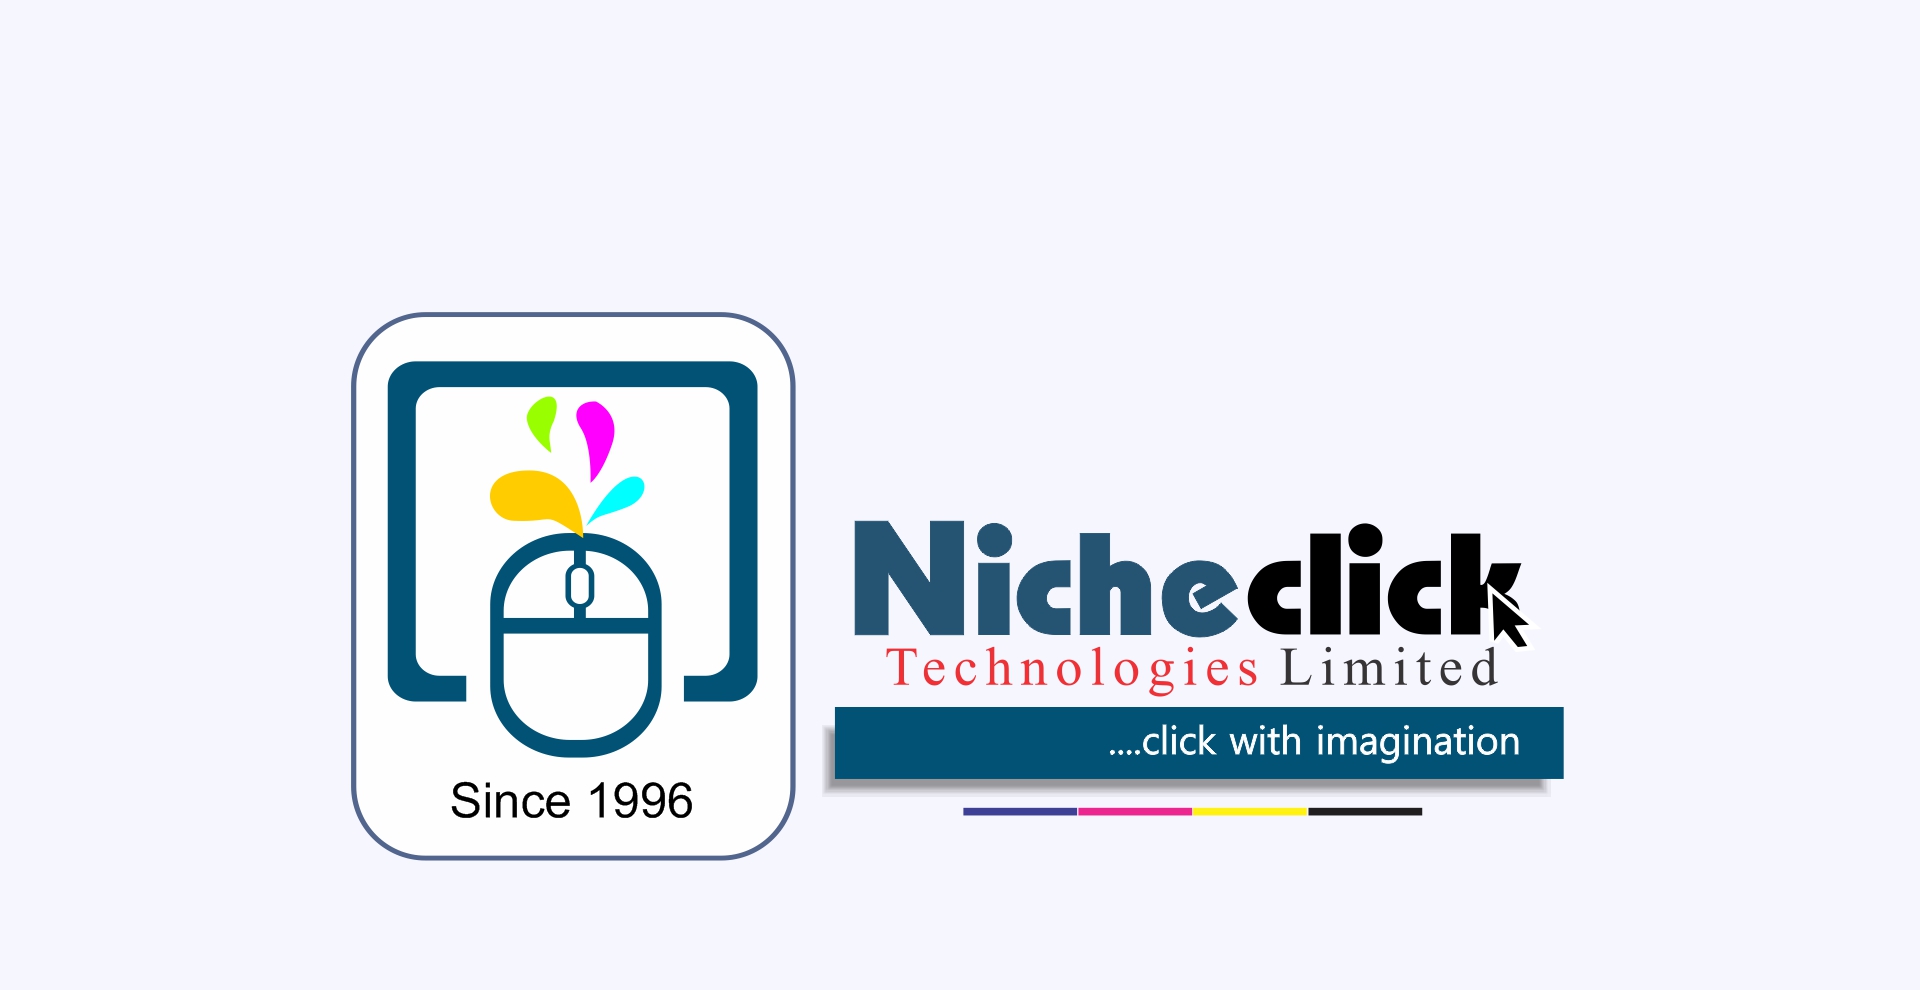 Are You Ready to Make Your Printing Awesome with NicheClick Technilogies?